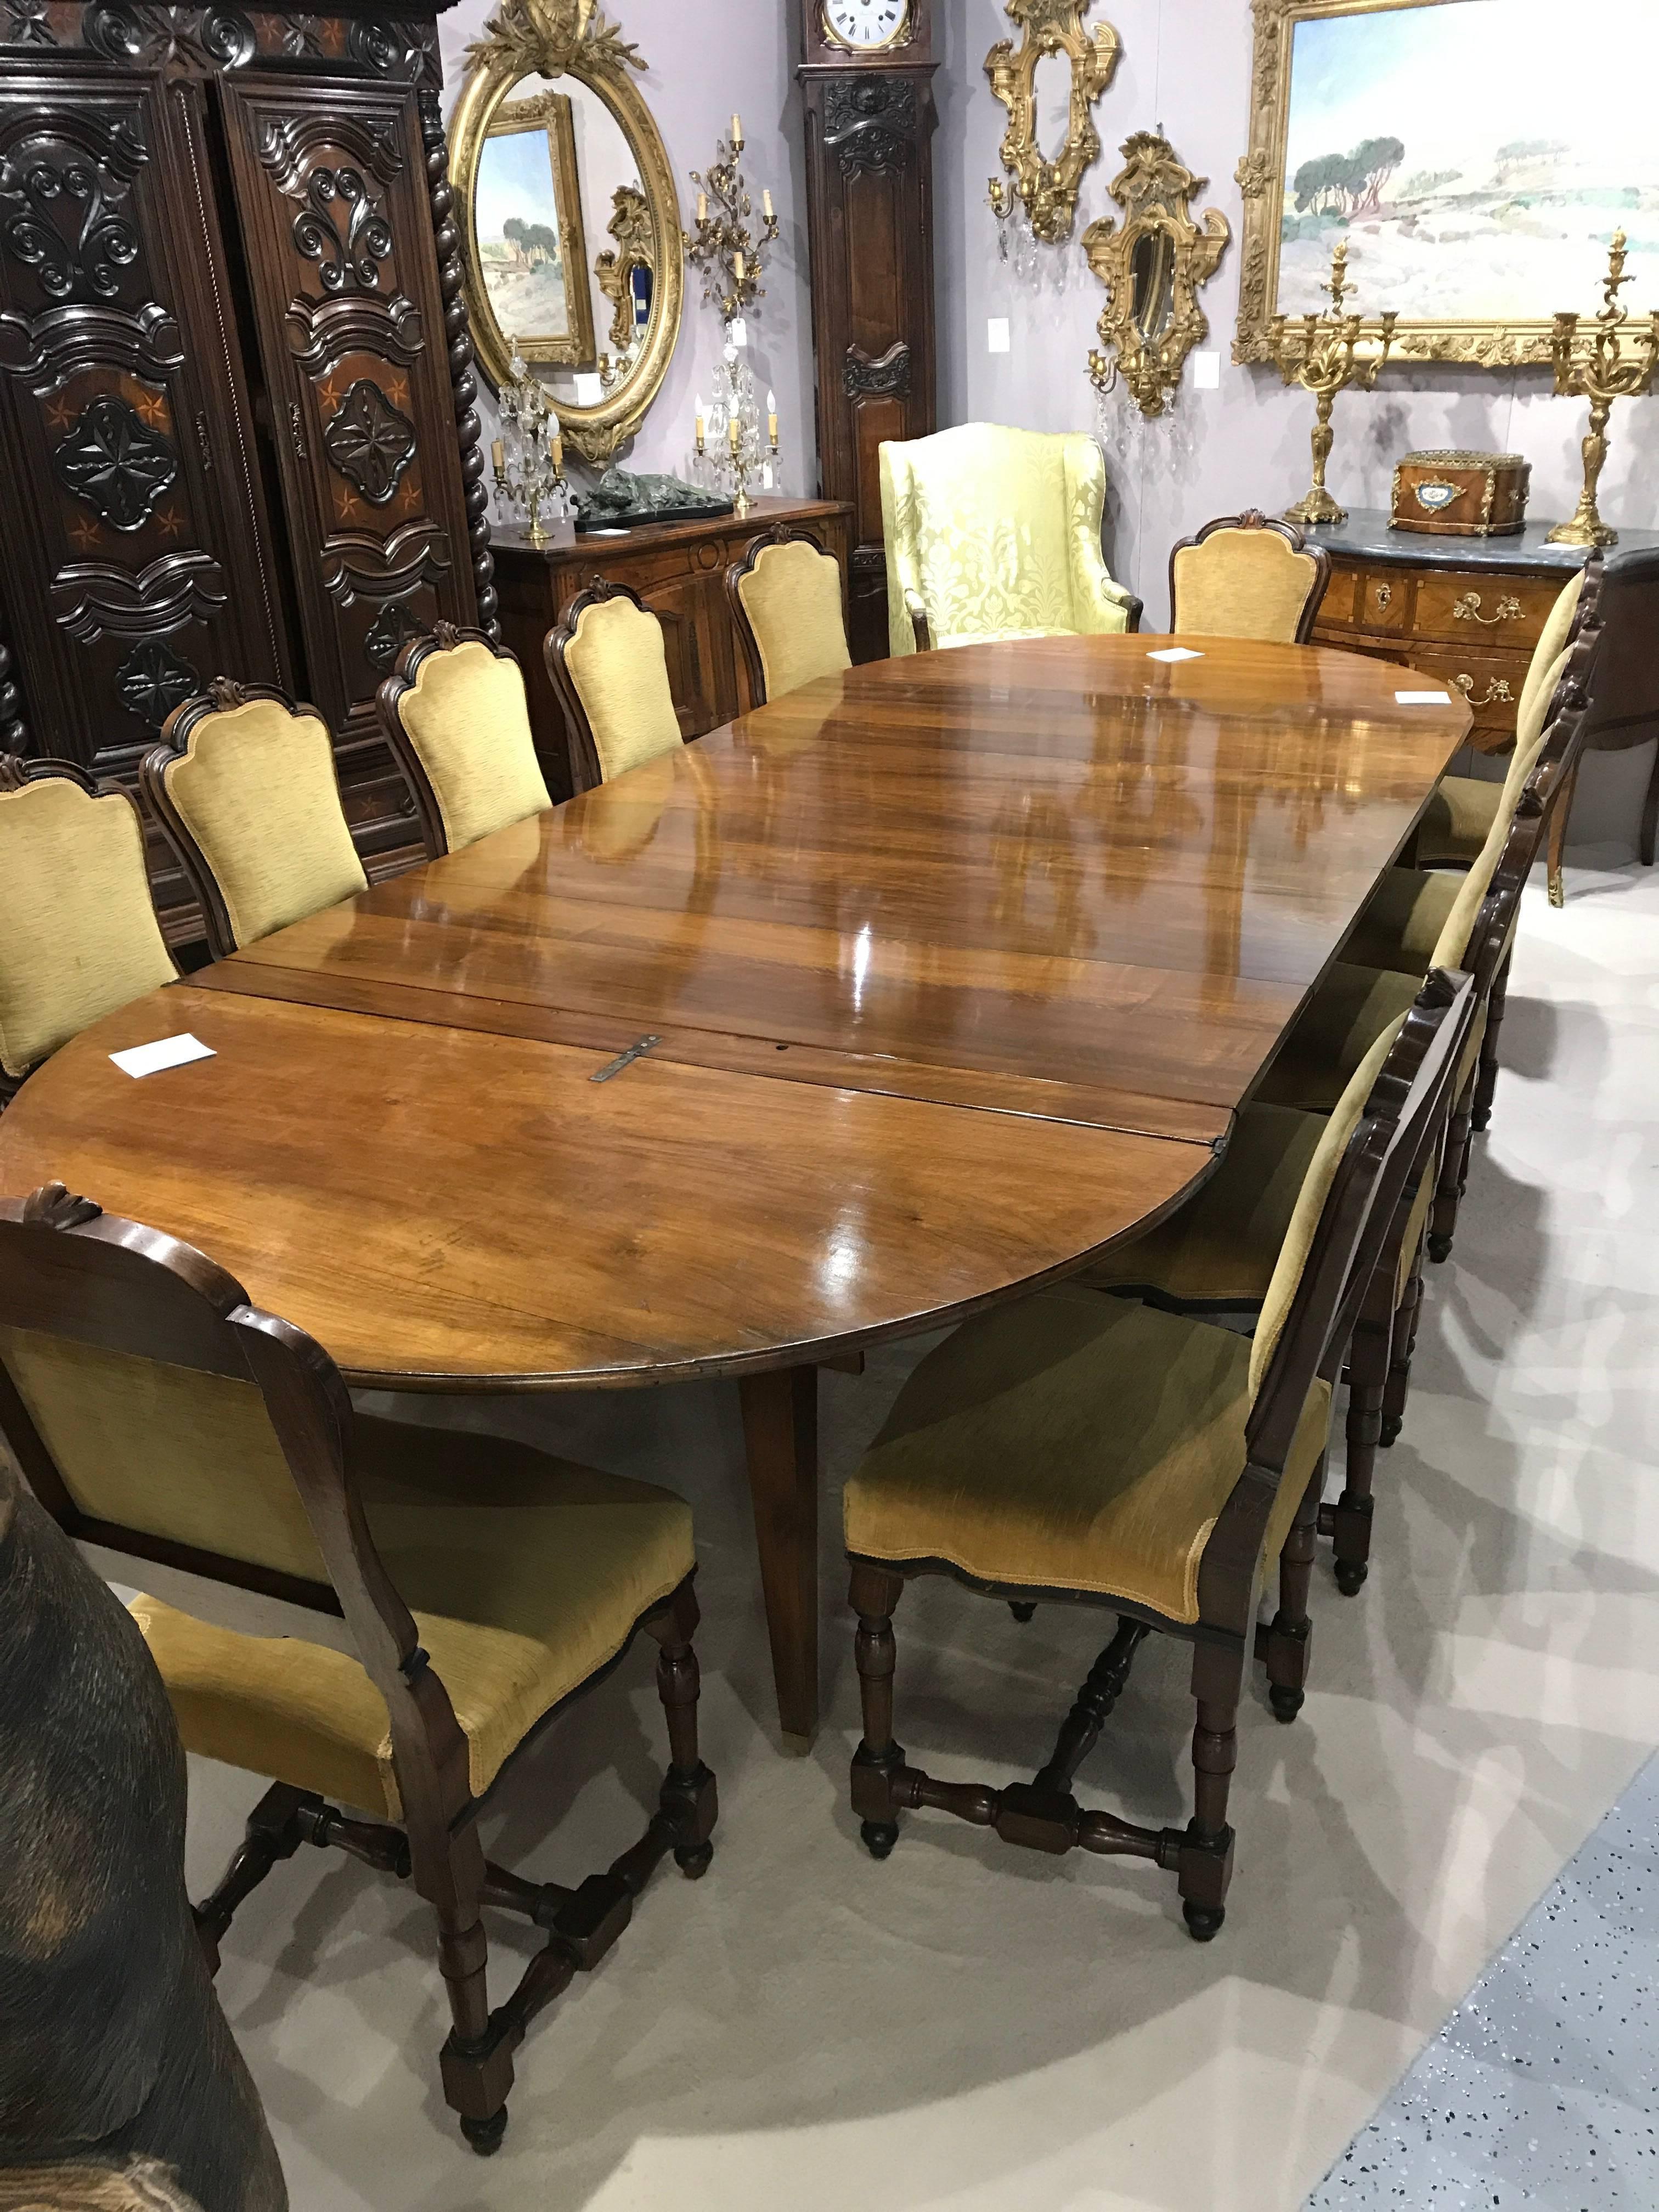 A large 19th century French Directoire walnut dining table with five new leaves that expands from a demi-lune to 13 feet long. When fully extended this table can seat 16-18 people. Very sturdy and well constructed with ten legs on brass castors. New